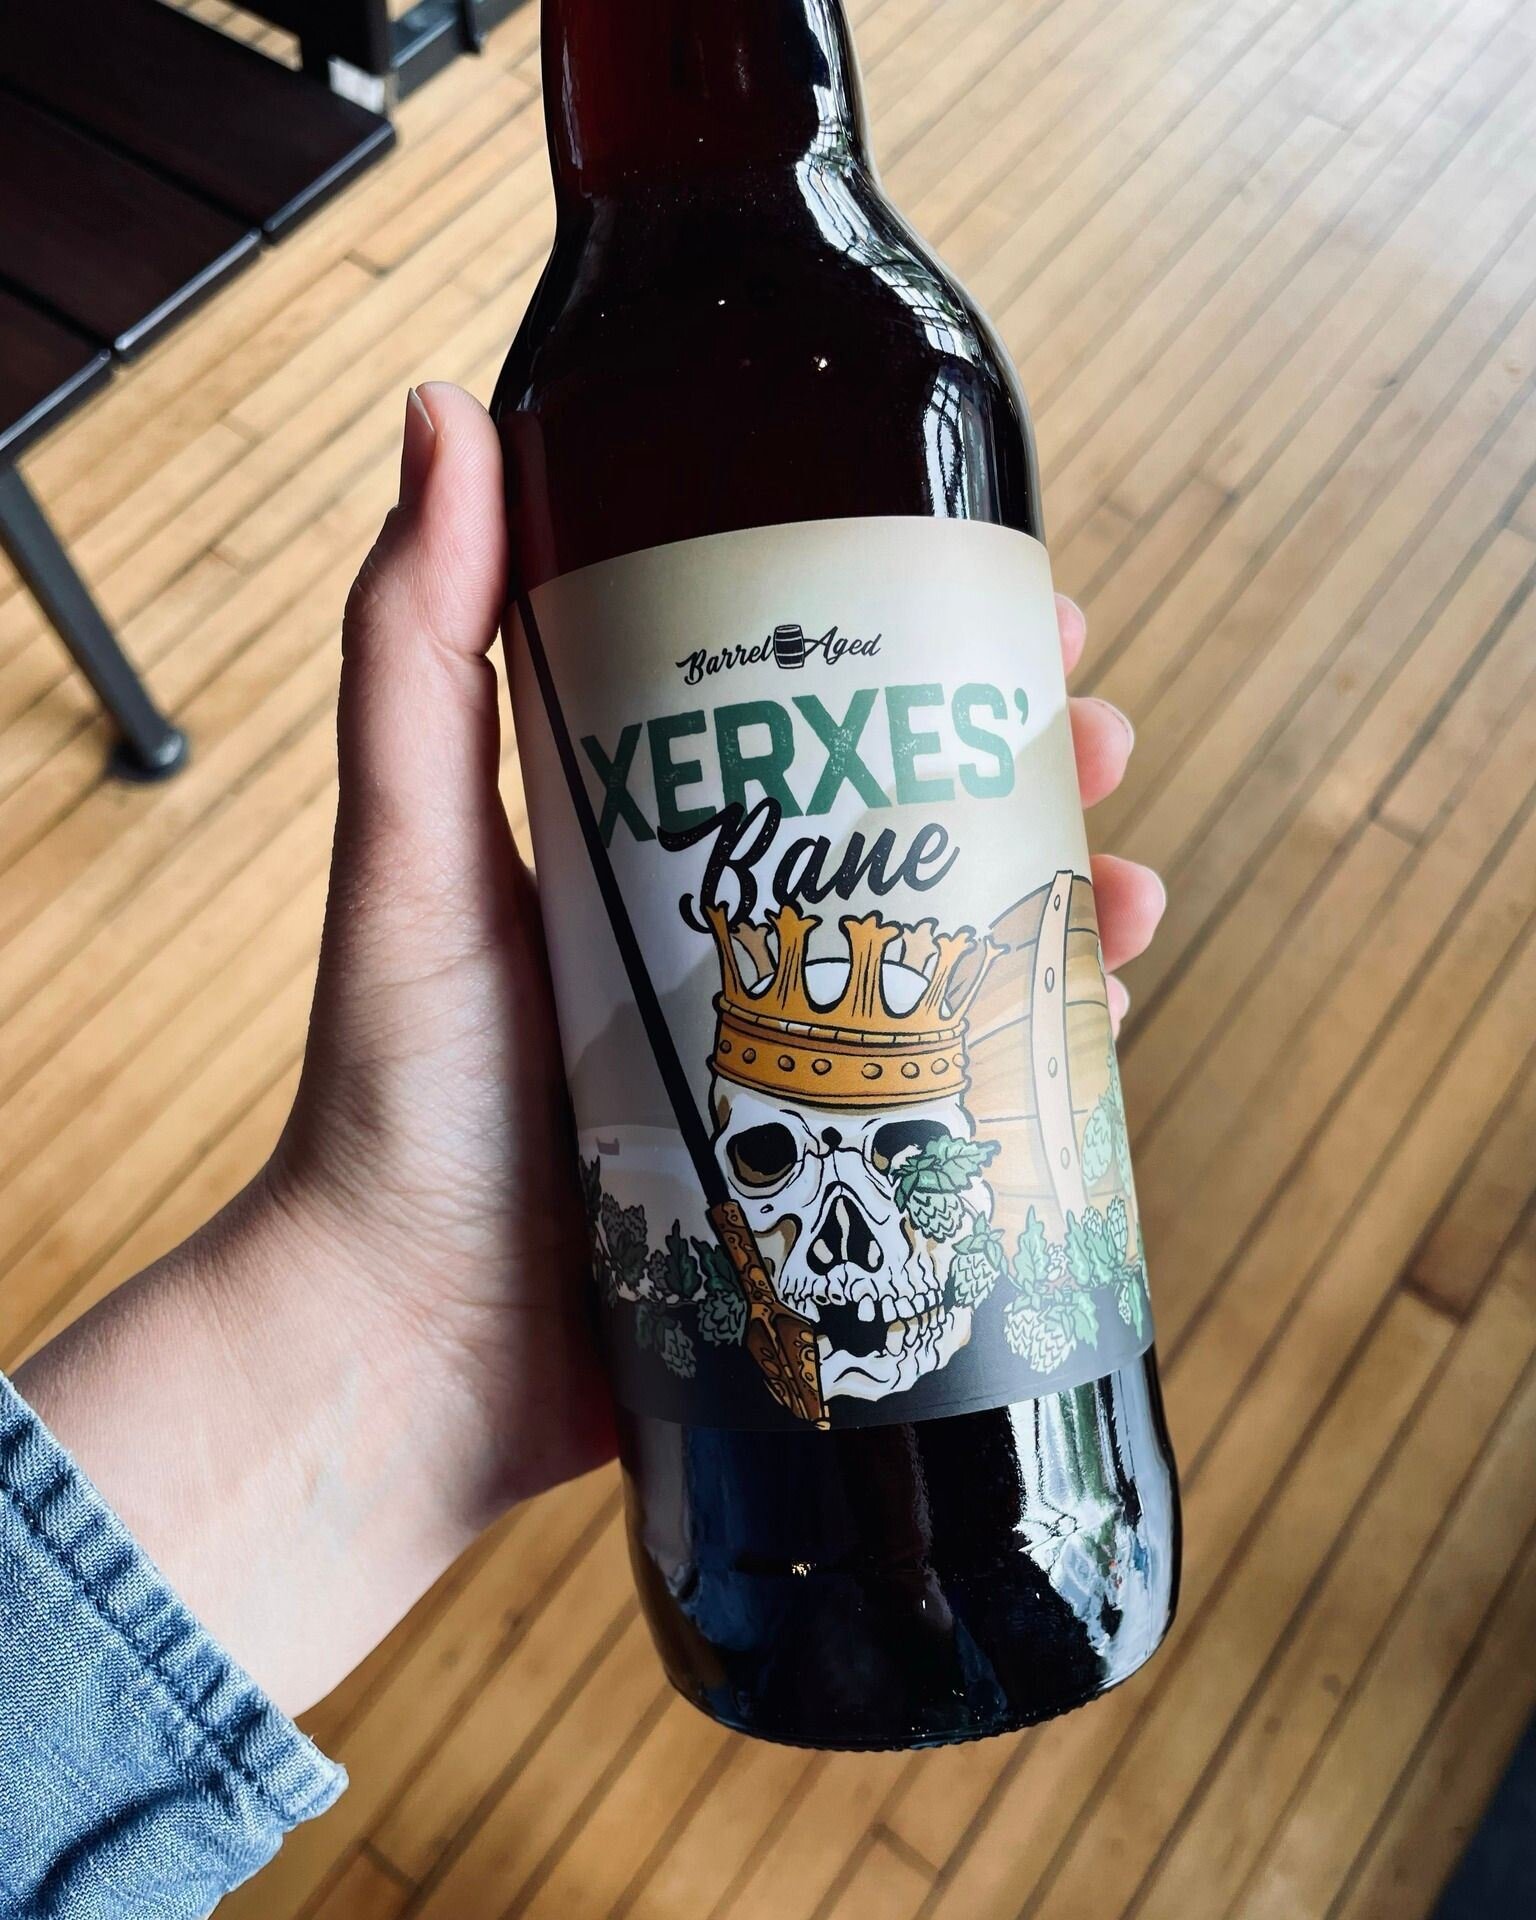 *BOTTLE RELEASE*

Xerxes' Bane | Double India Pale Ale�Aged in Whiskey Barrels

We took a basic IPA and beefed it up using large amounts of malt for muscles and hops for attitude. Then stuck it inside disemboweled whiskey barrels to train for months.